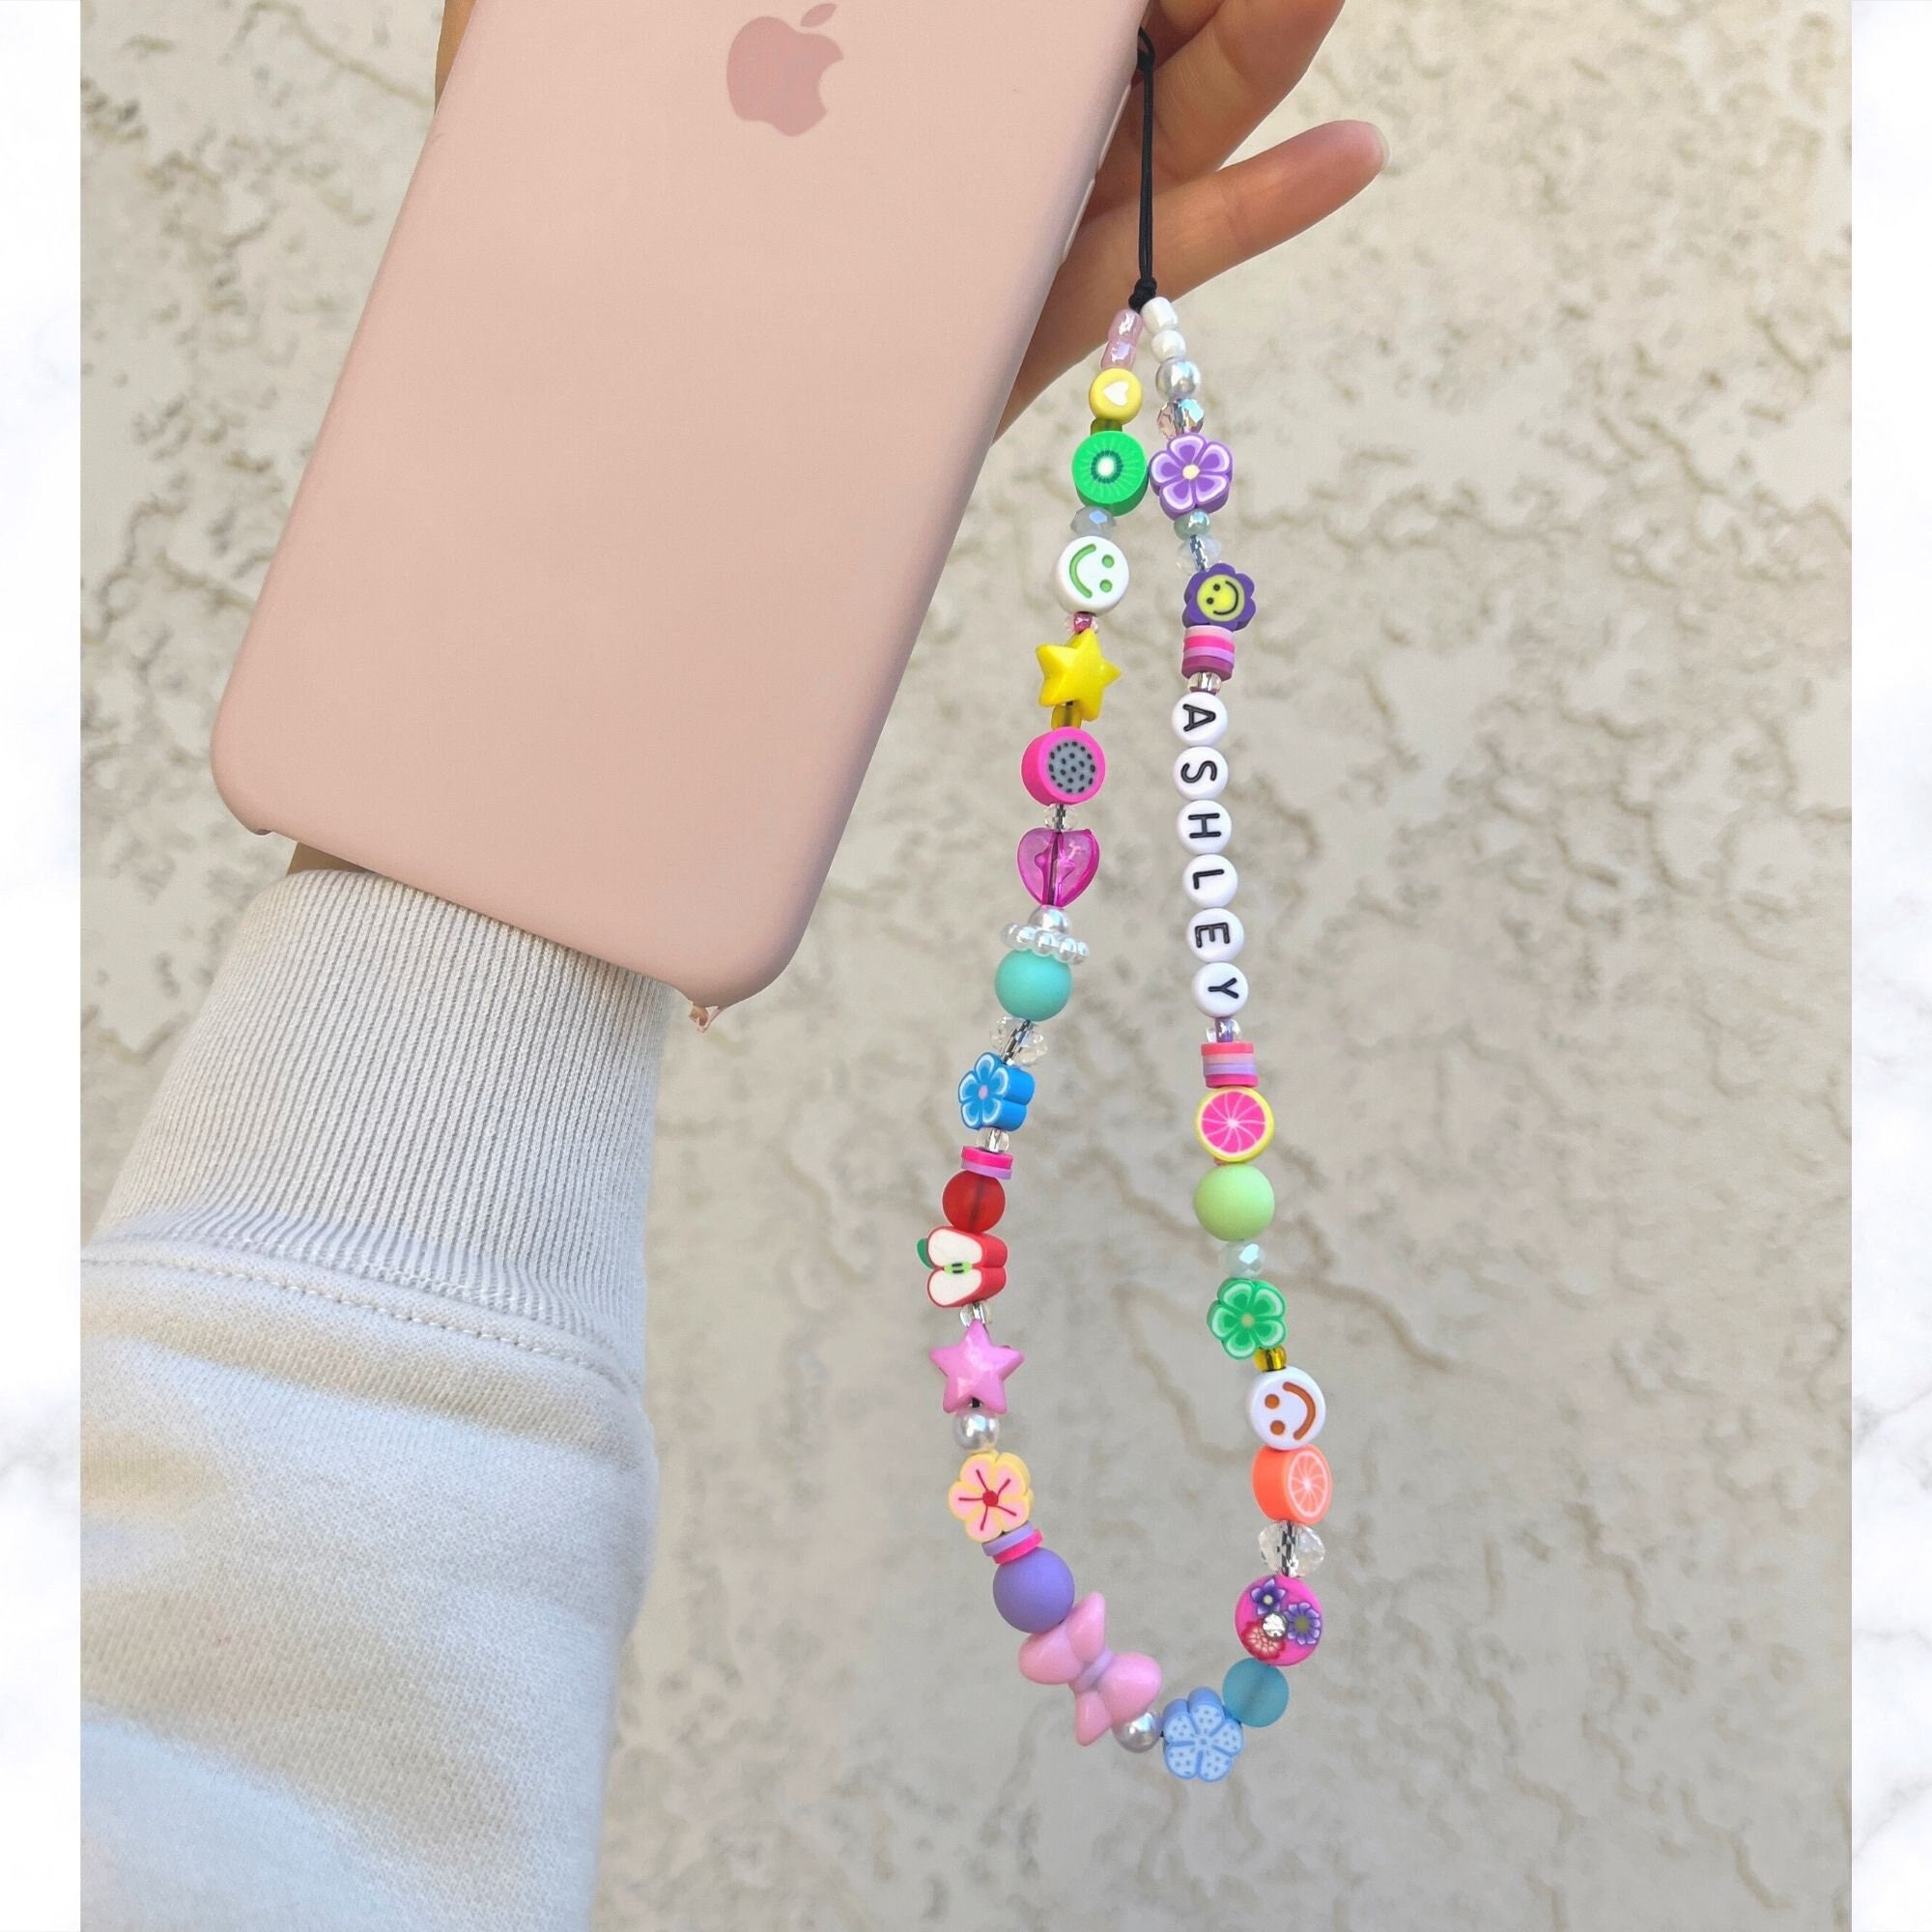 8 Pieces Beaded Phone Lanyard Colorful Beaded Cellphone Wrist Strap Phone Chain Strap Charm Fruit Star Letter Rainbow Acrylic Bead Chains Phone Chain Accessory for Women Girls 